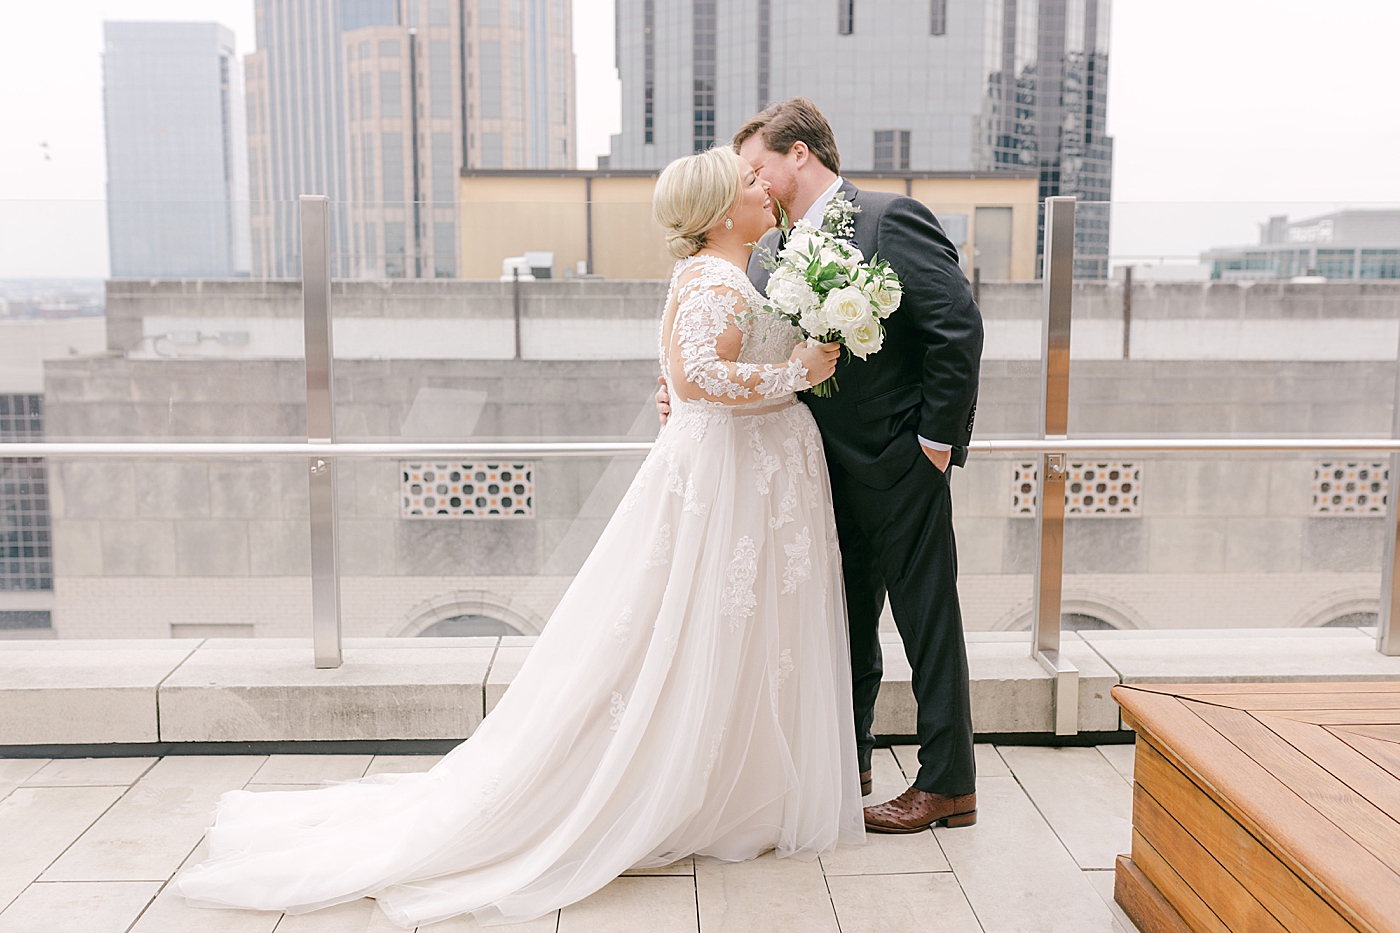 Bride and groom portraits on a rooftop | Photo by Hope Helmuth Photography